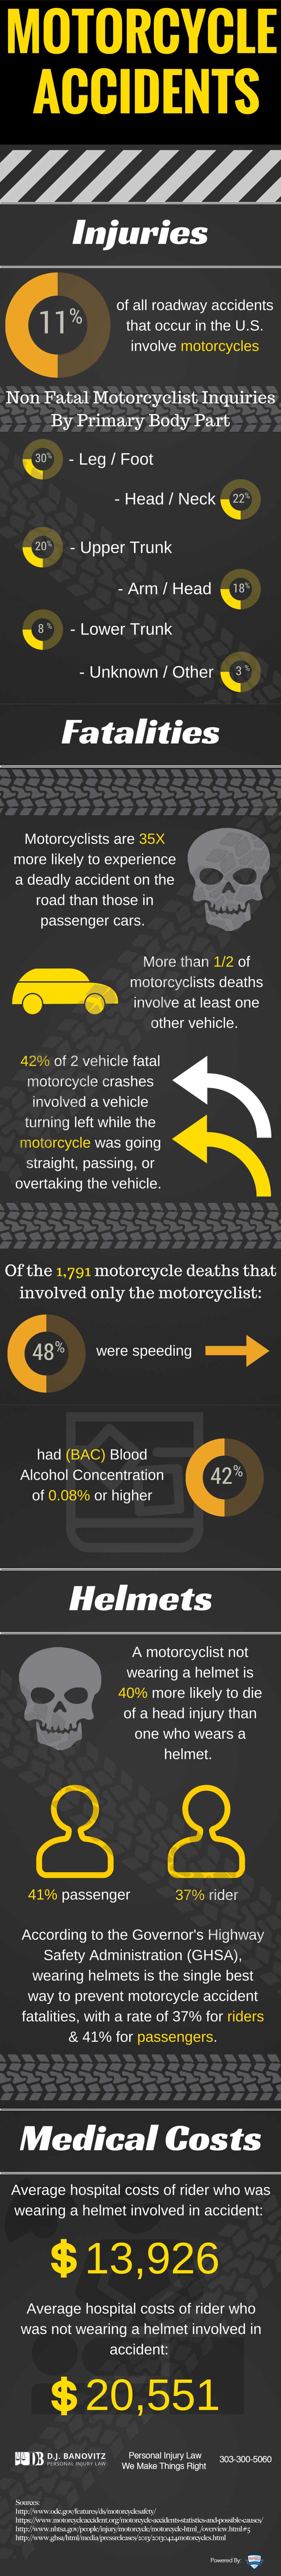 Motorcycle Accidents, Injuries & Deaths [Infographic]